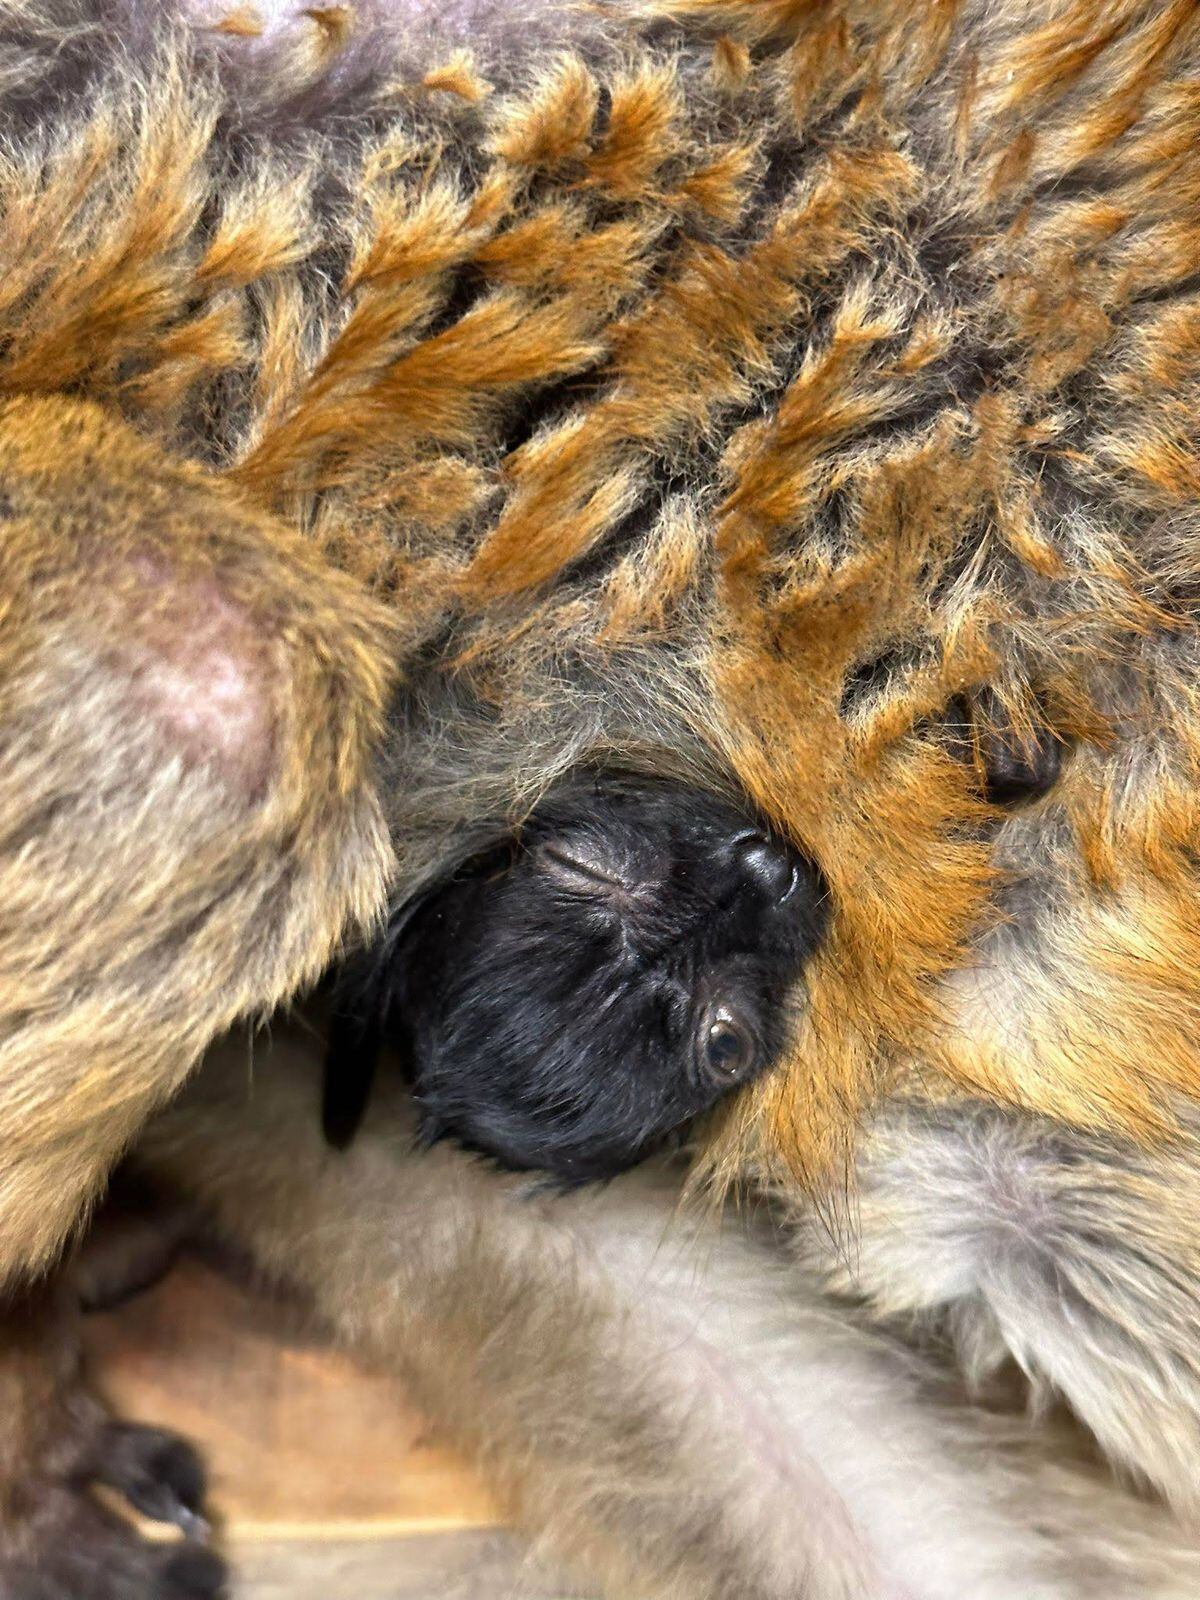 Two black lemur babies have been born at Dudley Zoo. Photo: Dudley Zoo.